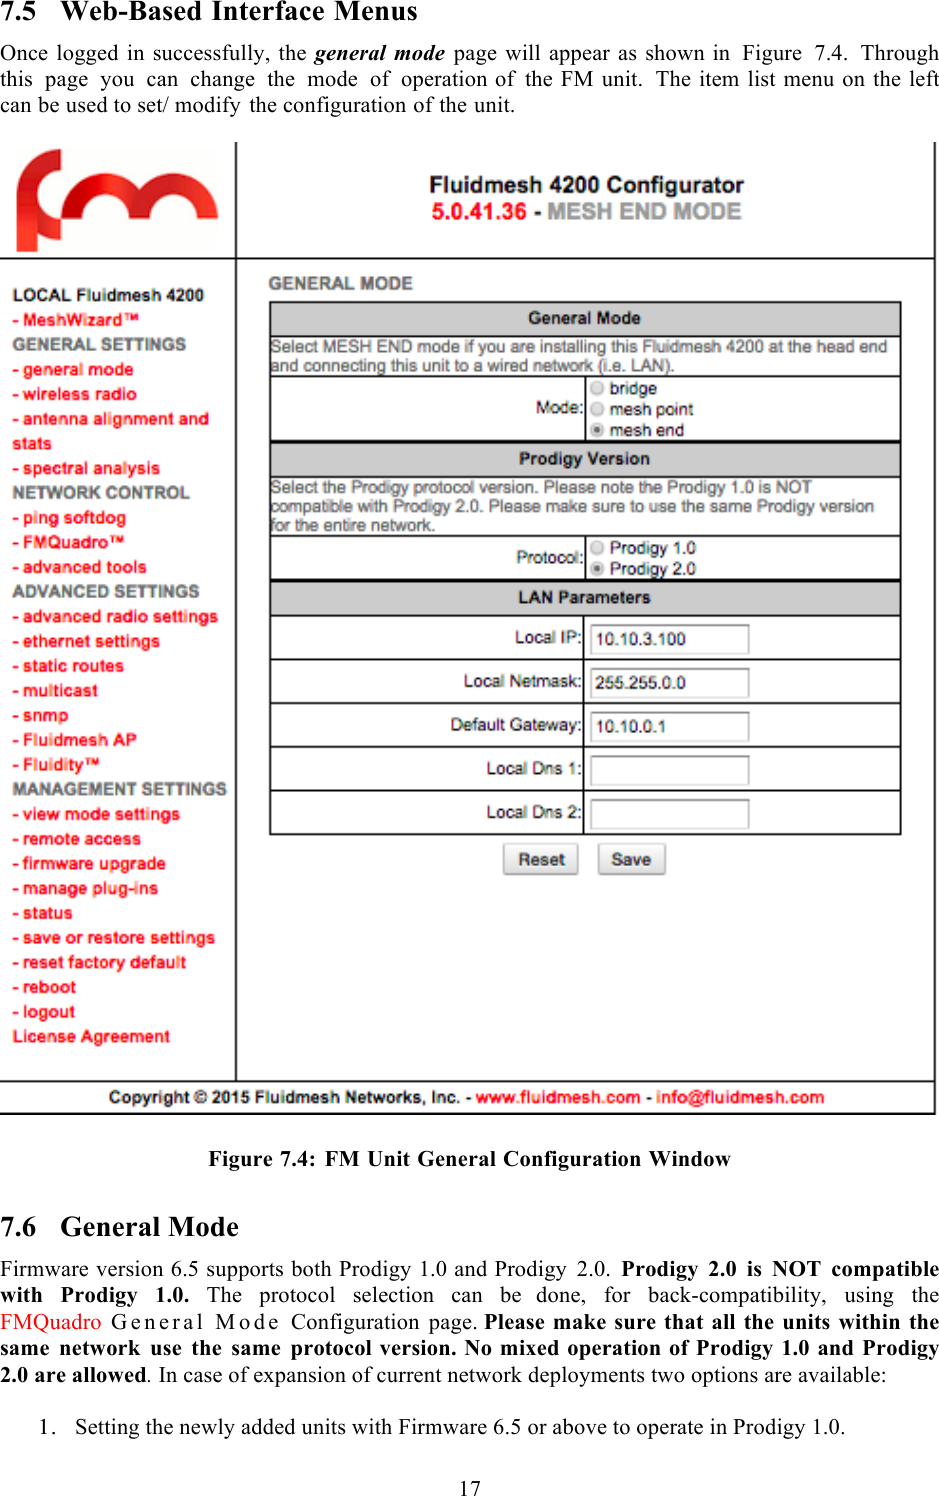  17  7.5 Web-Based Interface Menus Once logged in successfully, the general mode page will appear as shown in Figure 7.4. Through this page you can change the mode of operation of the FM unit. The item list menu on the left can be used to set/ modify the configuration of the unit.     Figure 7.4: FM Unit General Configuration Window 7.6 General Mode Firmware version 6.5 supports both Prodigy 1.0 and Prodigy 2.0.  Prodigy 2.0 is NOT compatible with Prodigy 1.0. The protocol selection can be  done, for back-compatibility, using the FMQuadro General Mode Configuration page. Please make sure that all the units within the same network use the same protocol version. No mixed operation of Prodigy 1.0 and Prodigy 2.0 are allowed. In case of expansion of current network deployments two options are available:  1. Setting the newly added units with Firmware 6.5 or above to operate in Prodigy 1.0. 